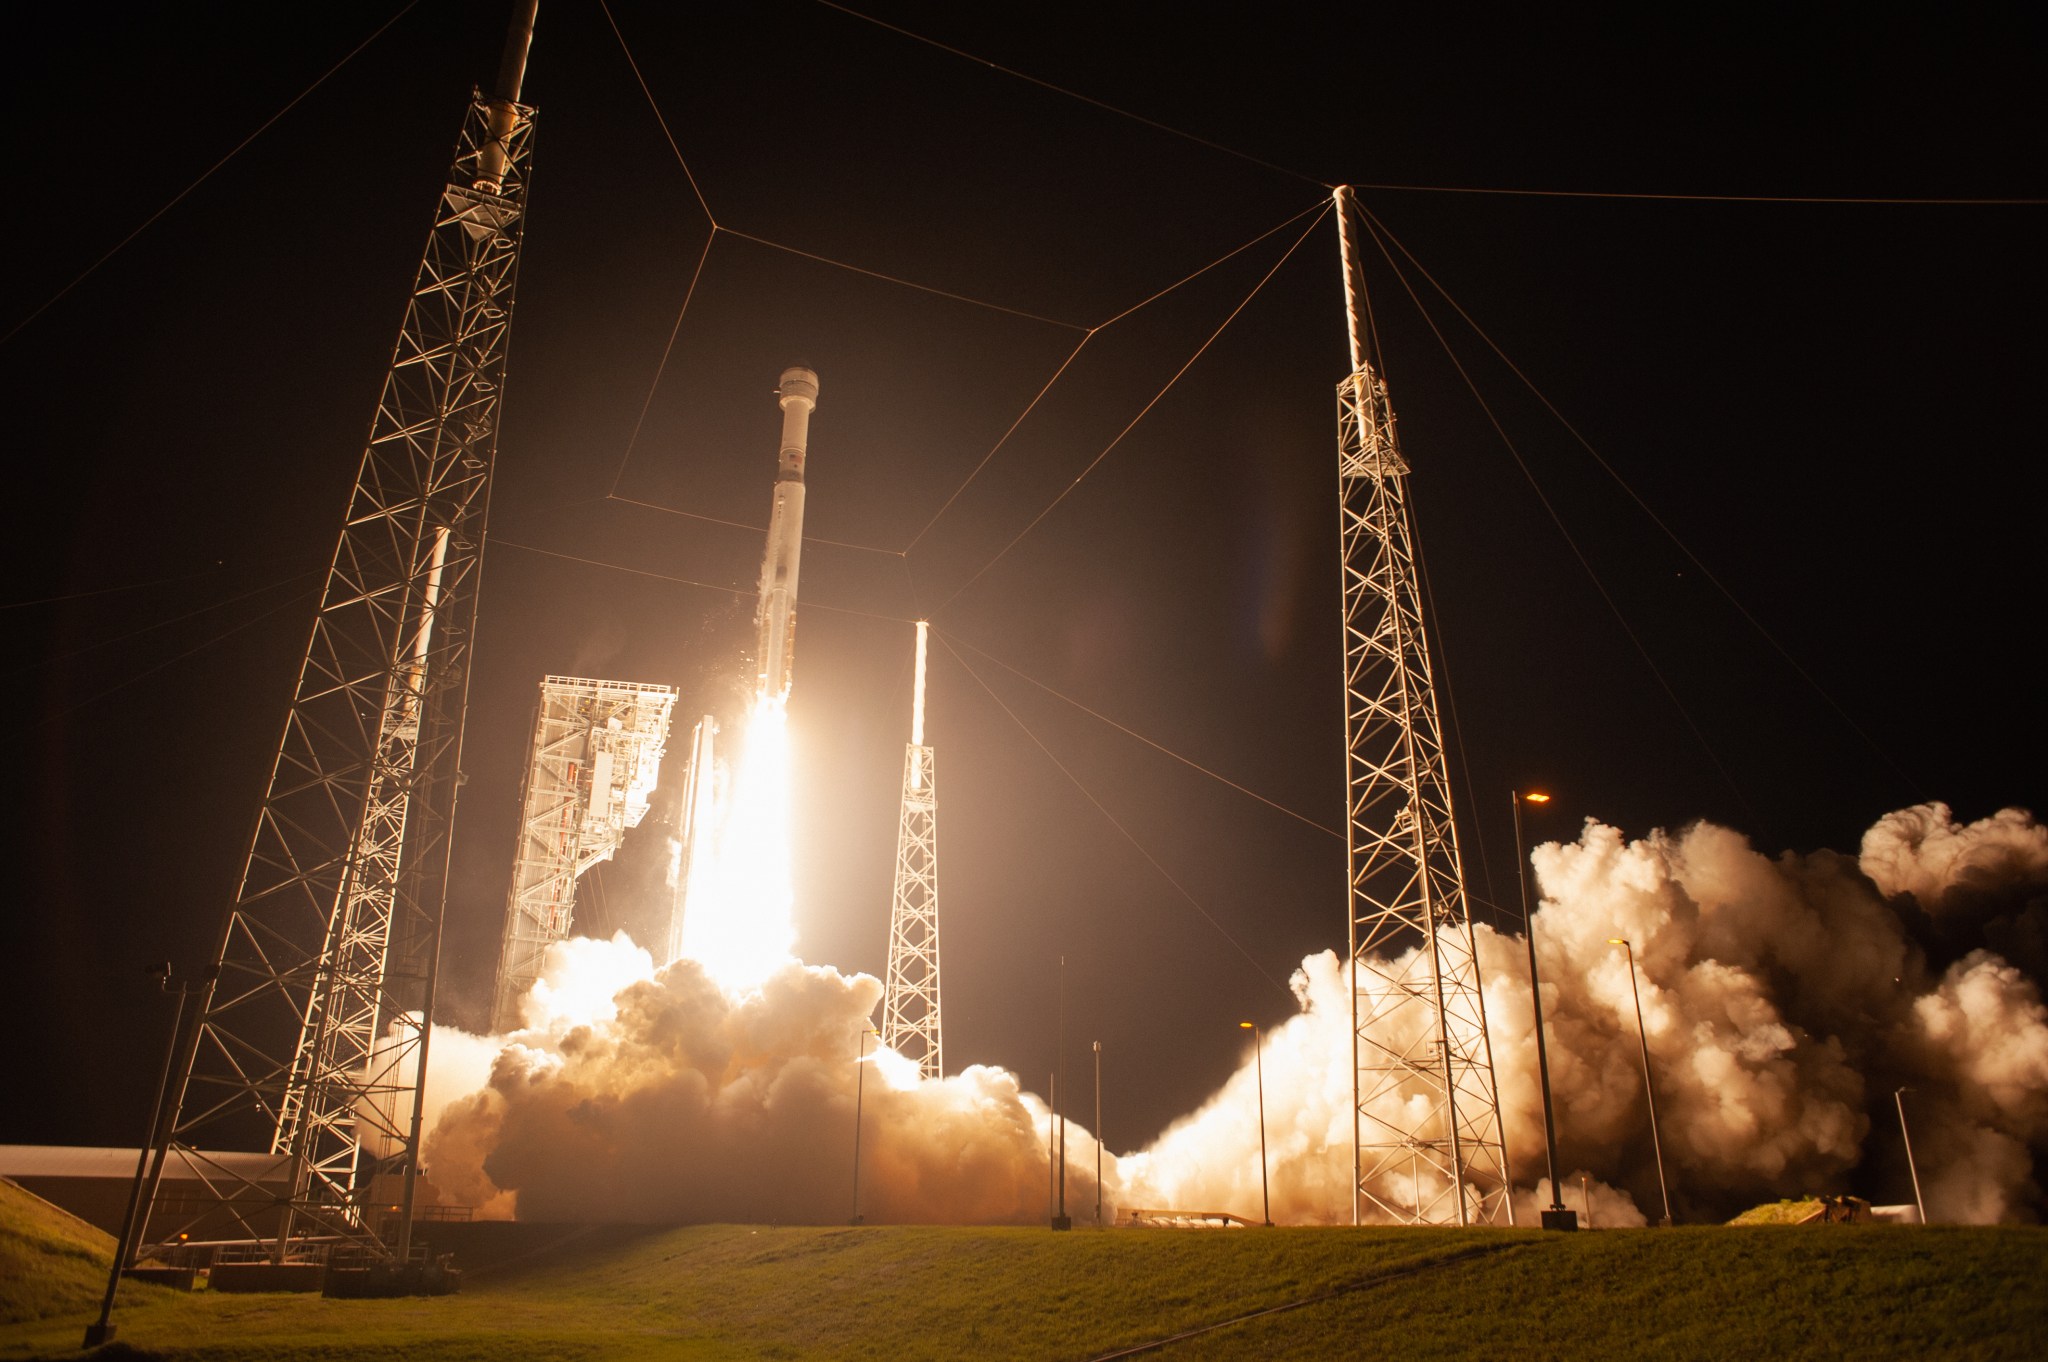 A two-stage United Launch Alliance Atlas V rocket lifts off from Space Launch Complex 41 at Cape Canaveral Air Force Station in Florida for Boeing’s Orbital Flight Test.